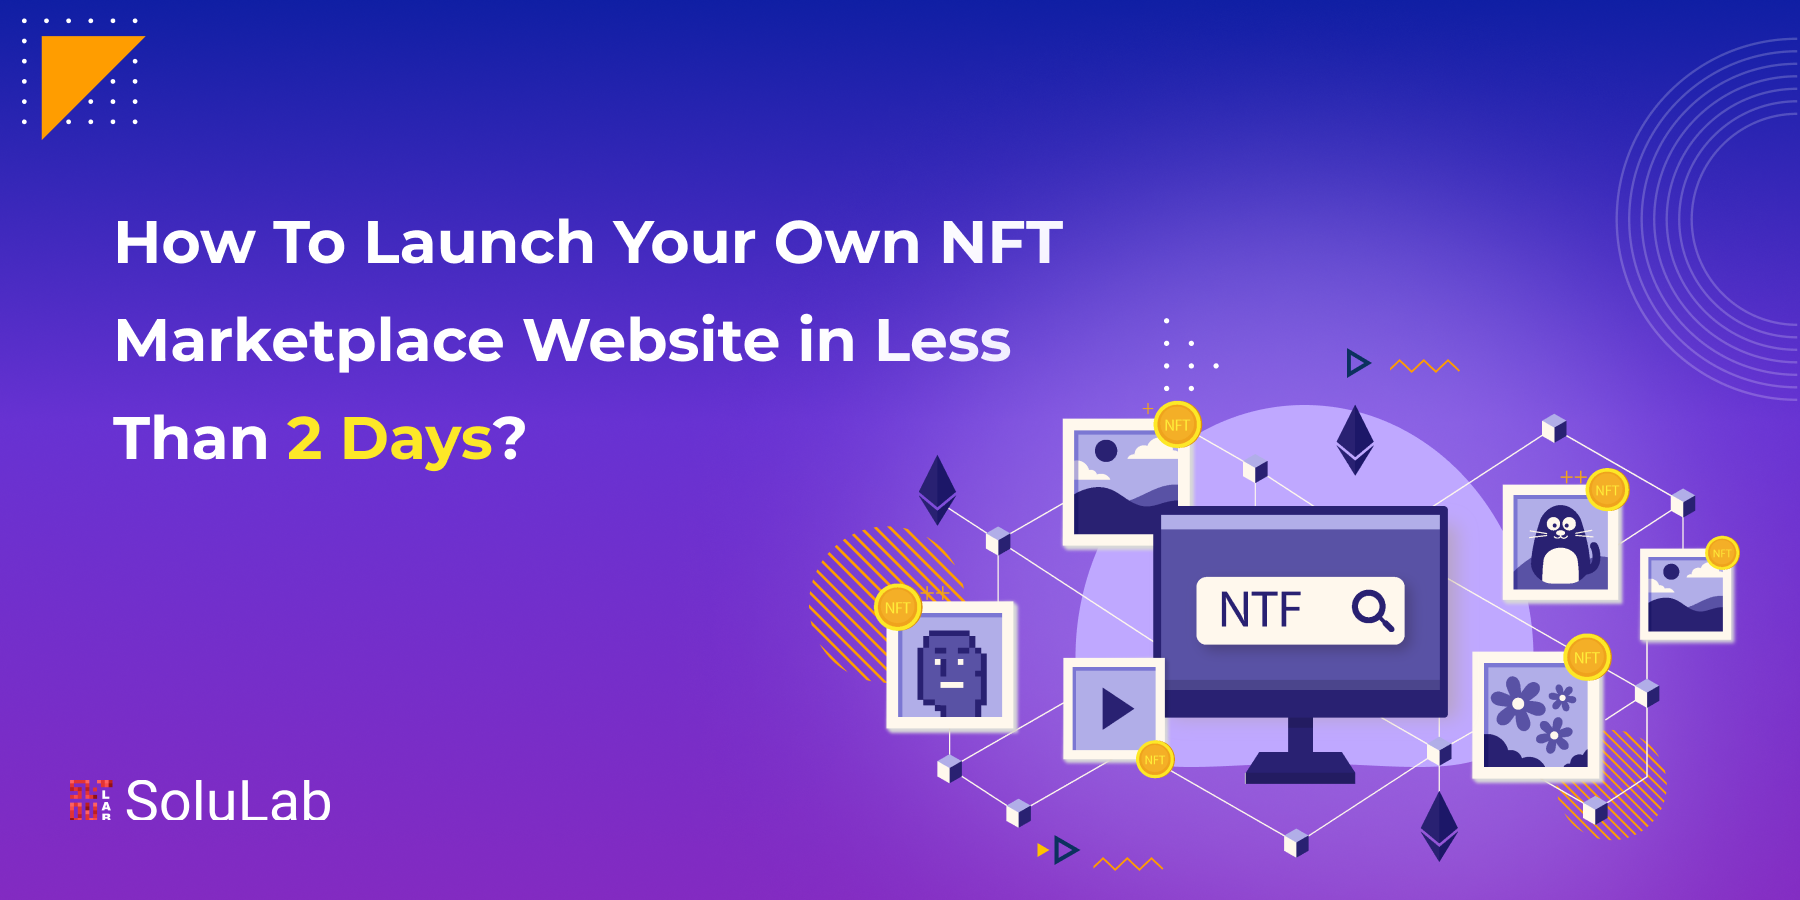 How To Launch Your Own NFT Marketplace Website in Less Than 2 Days?